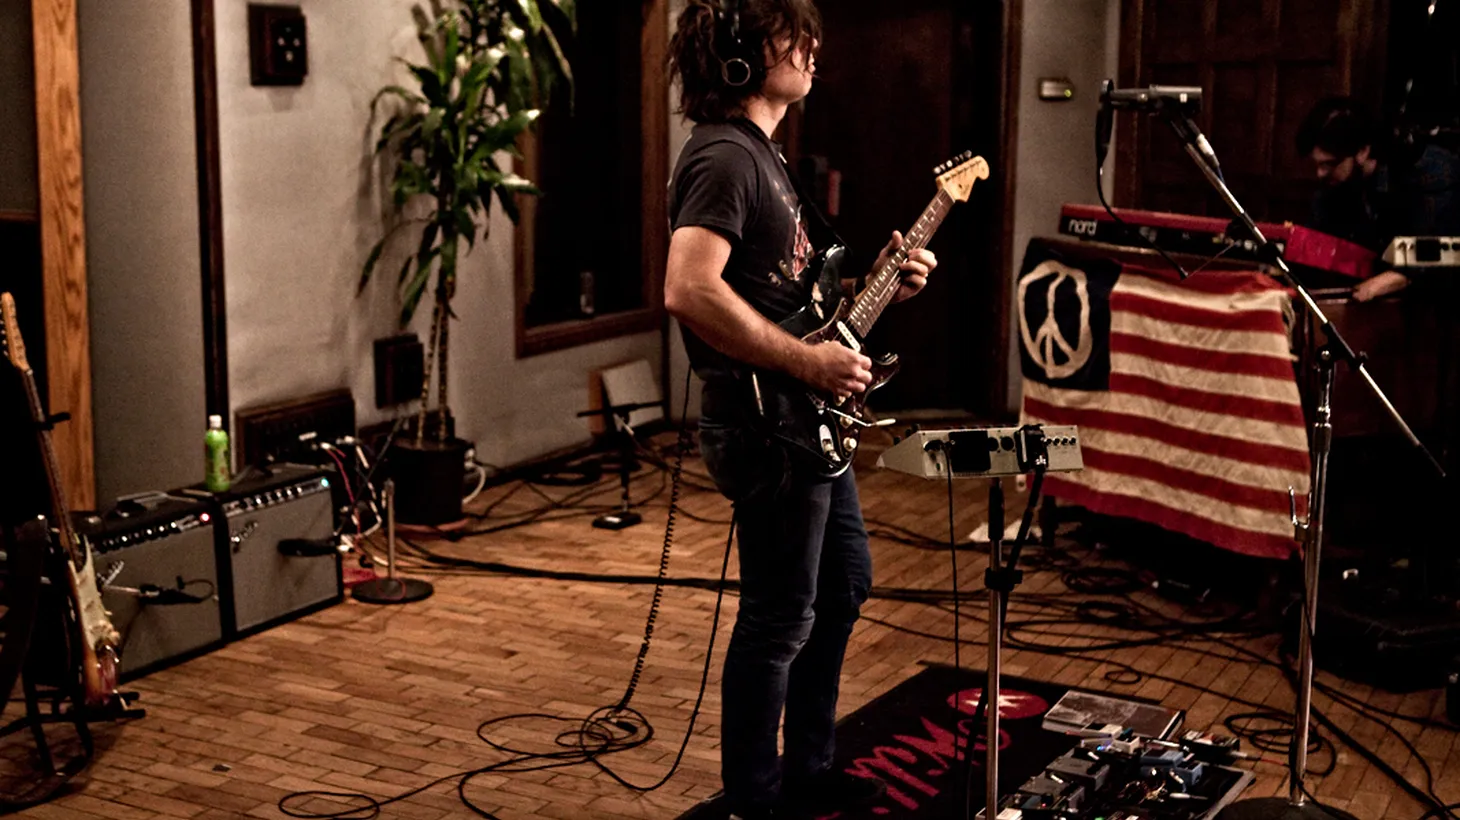 Ryan Adams' 14th studio album was recorded at his own Pax AM studios here in LA. The self-titled work is heartland rock at its finest, with Ryan’s special flare.